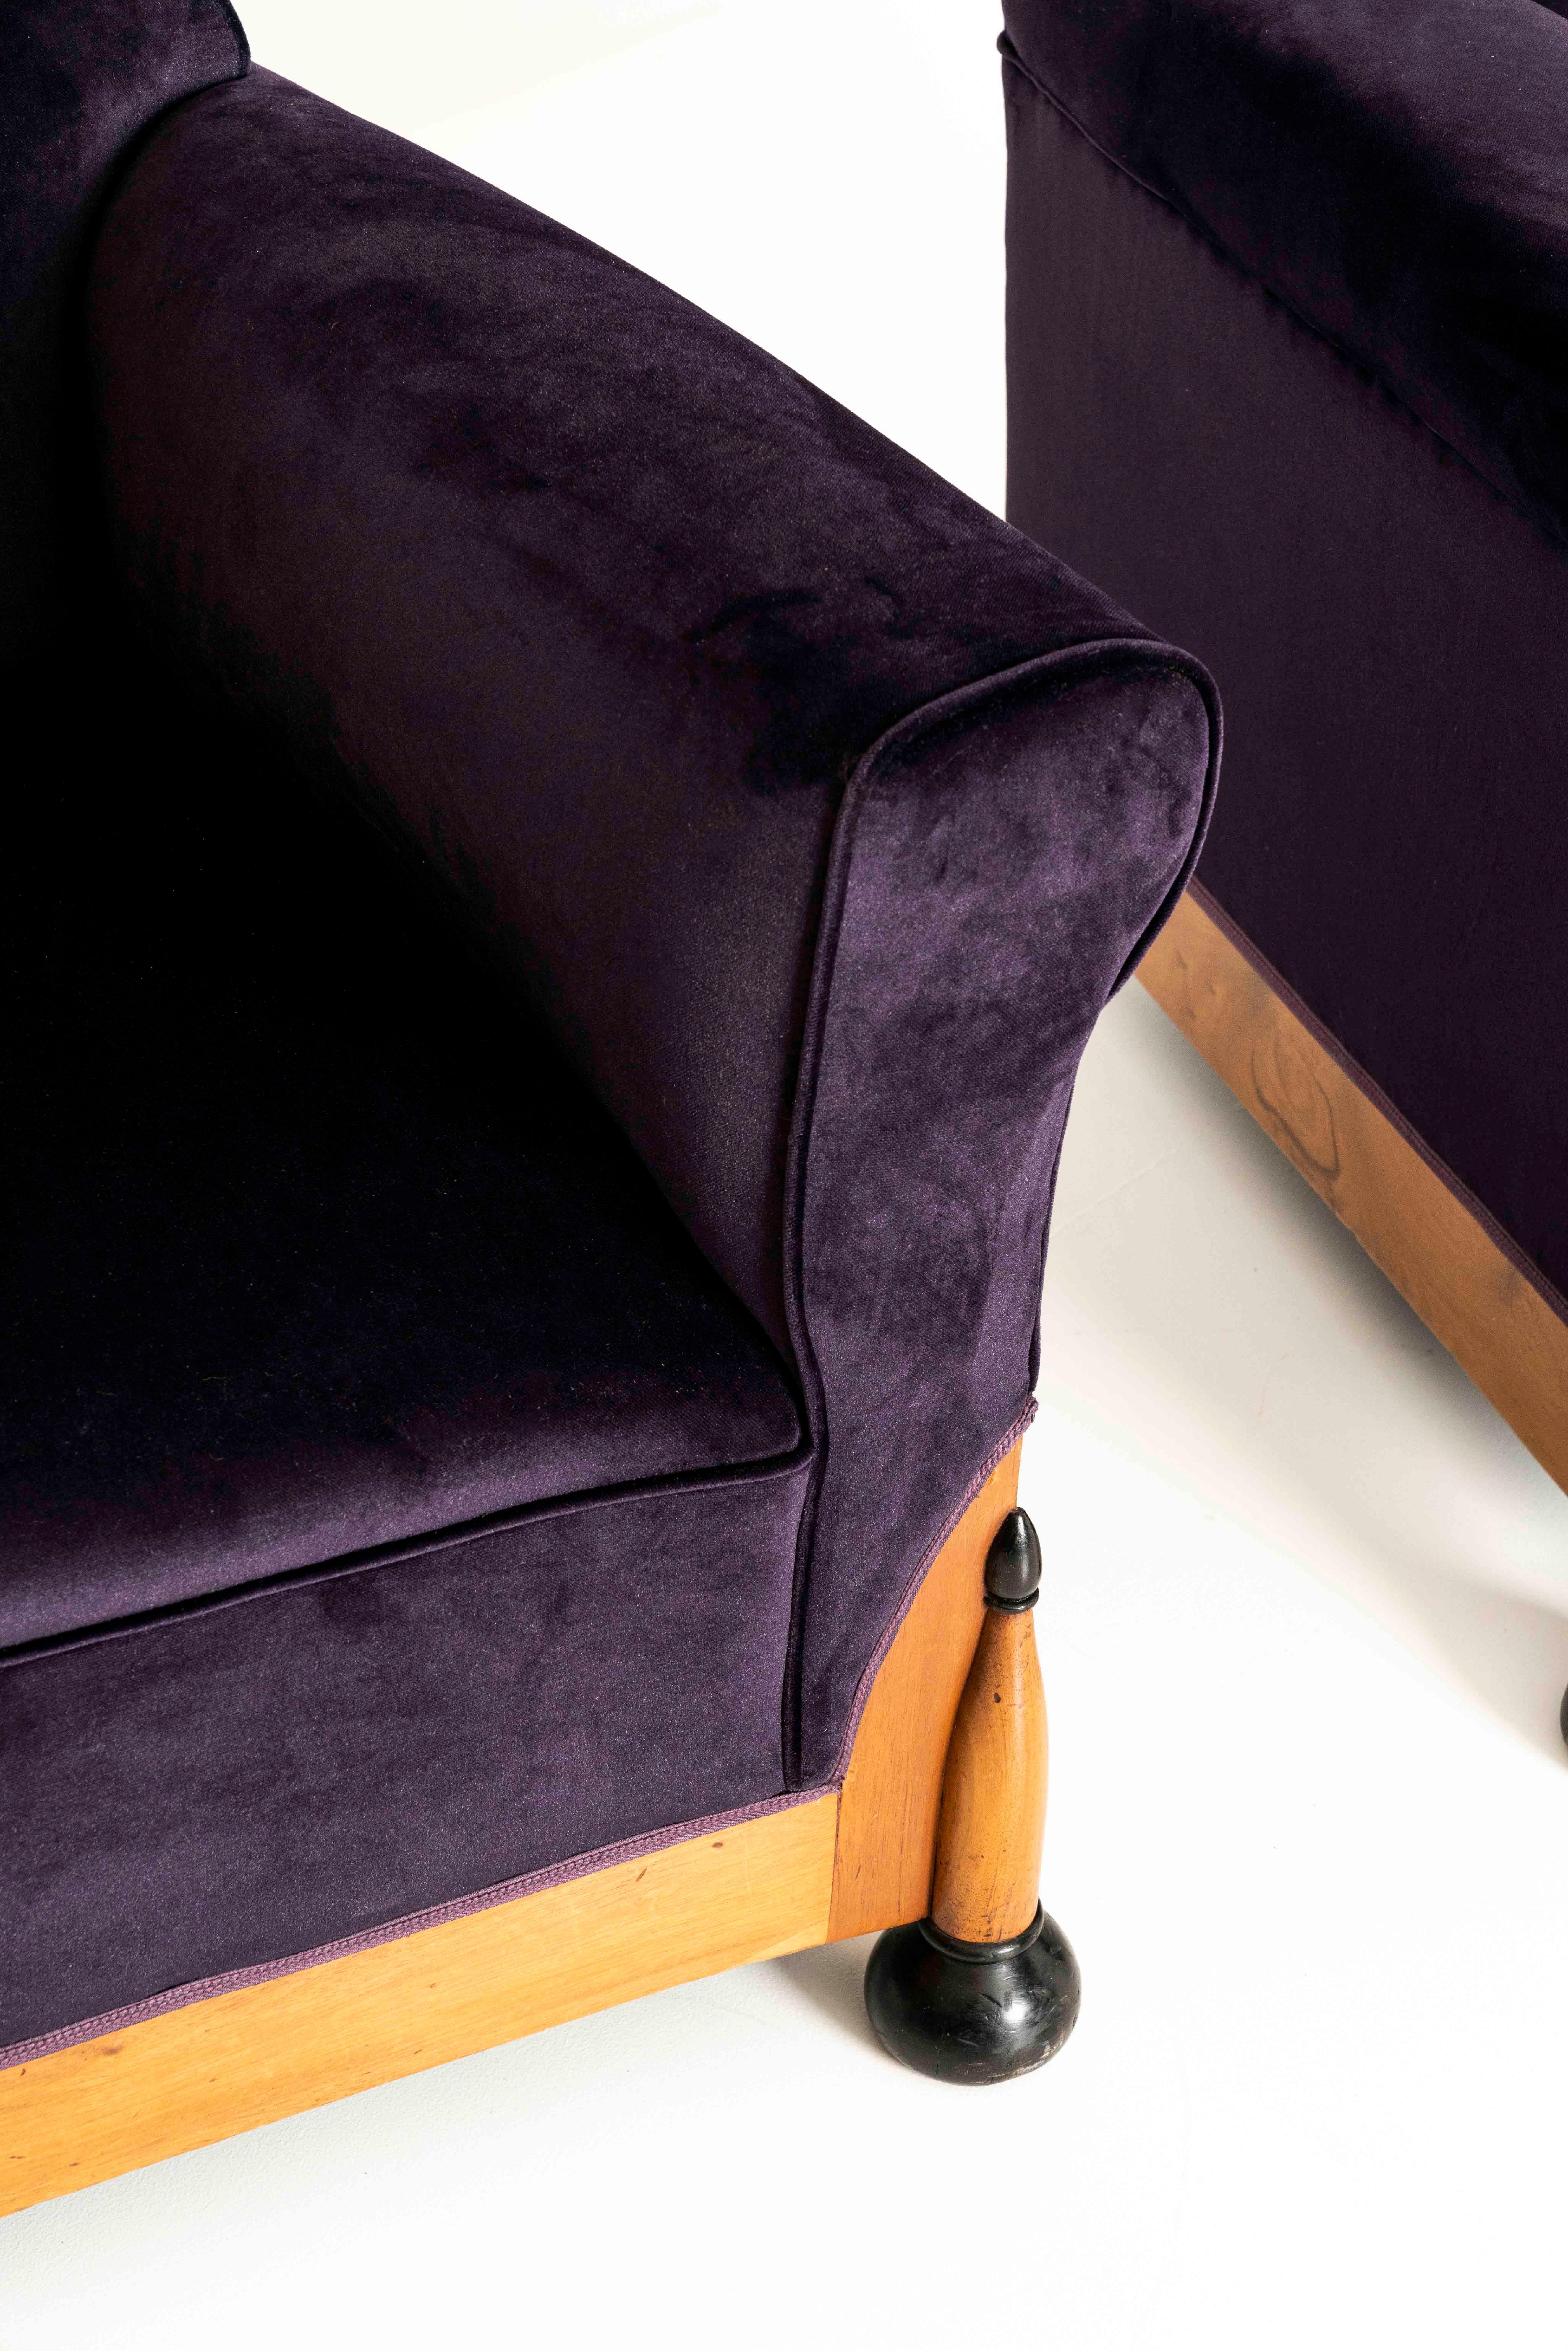 Two Amsterdam School Lounge Chairs in Purple Velvet, The Netherlands 1930s 1